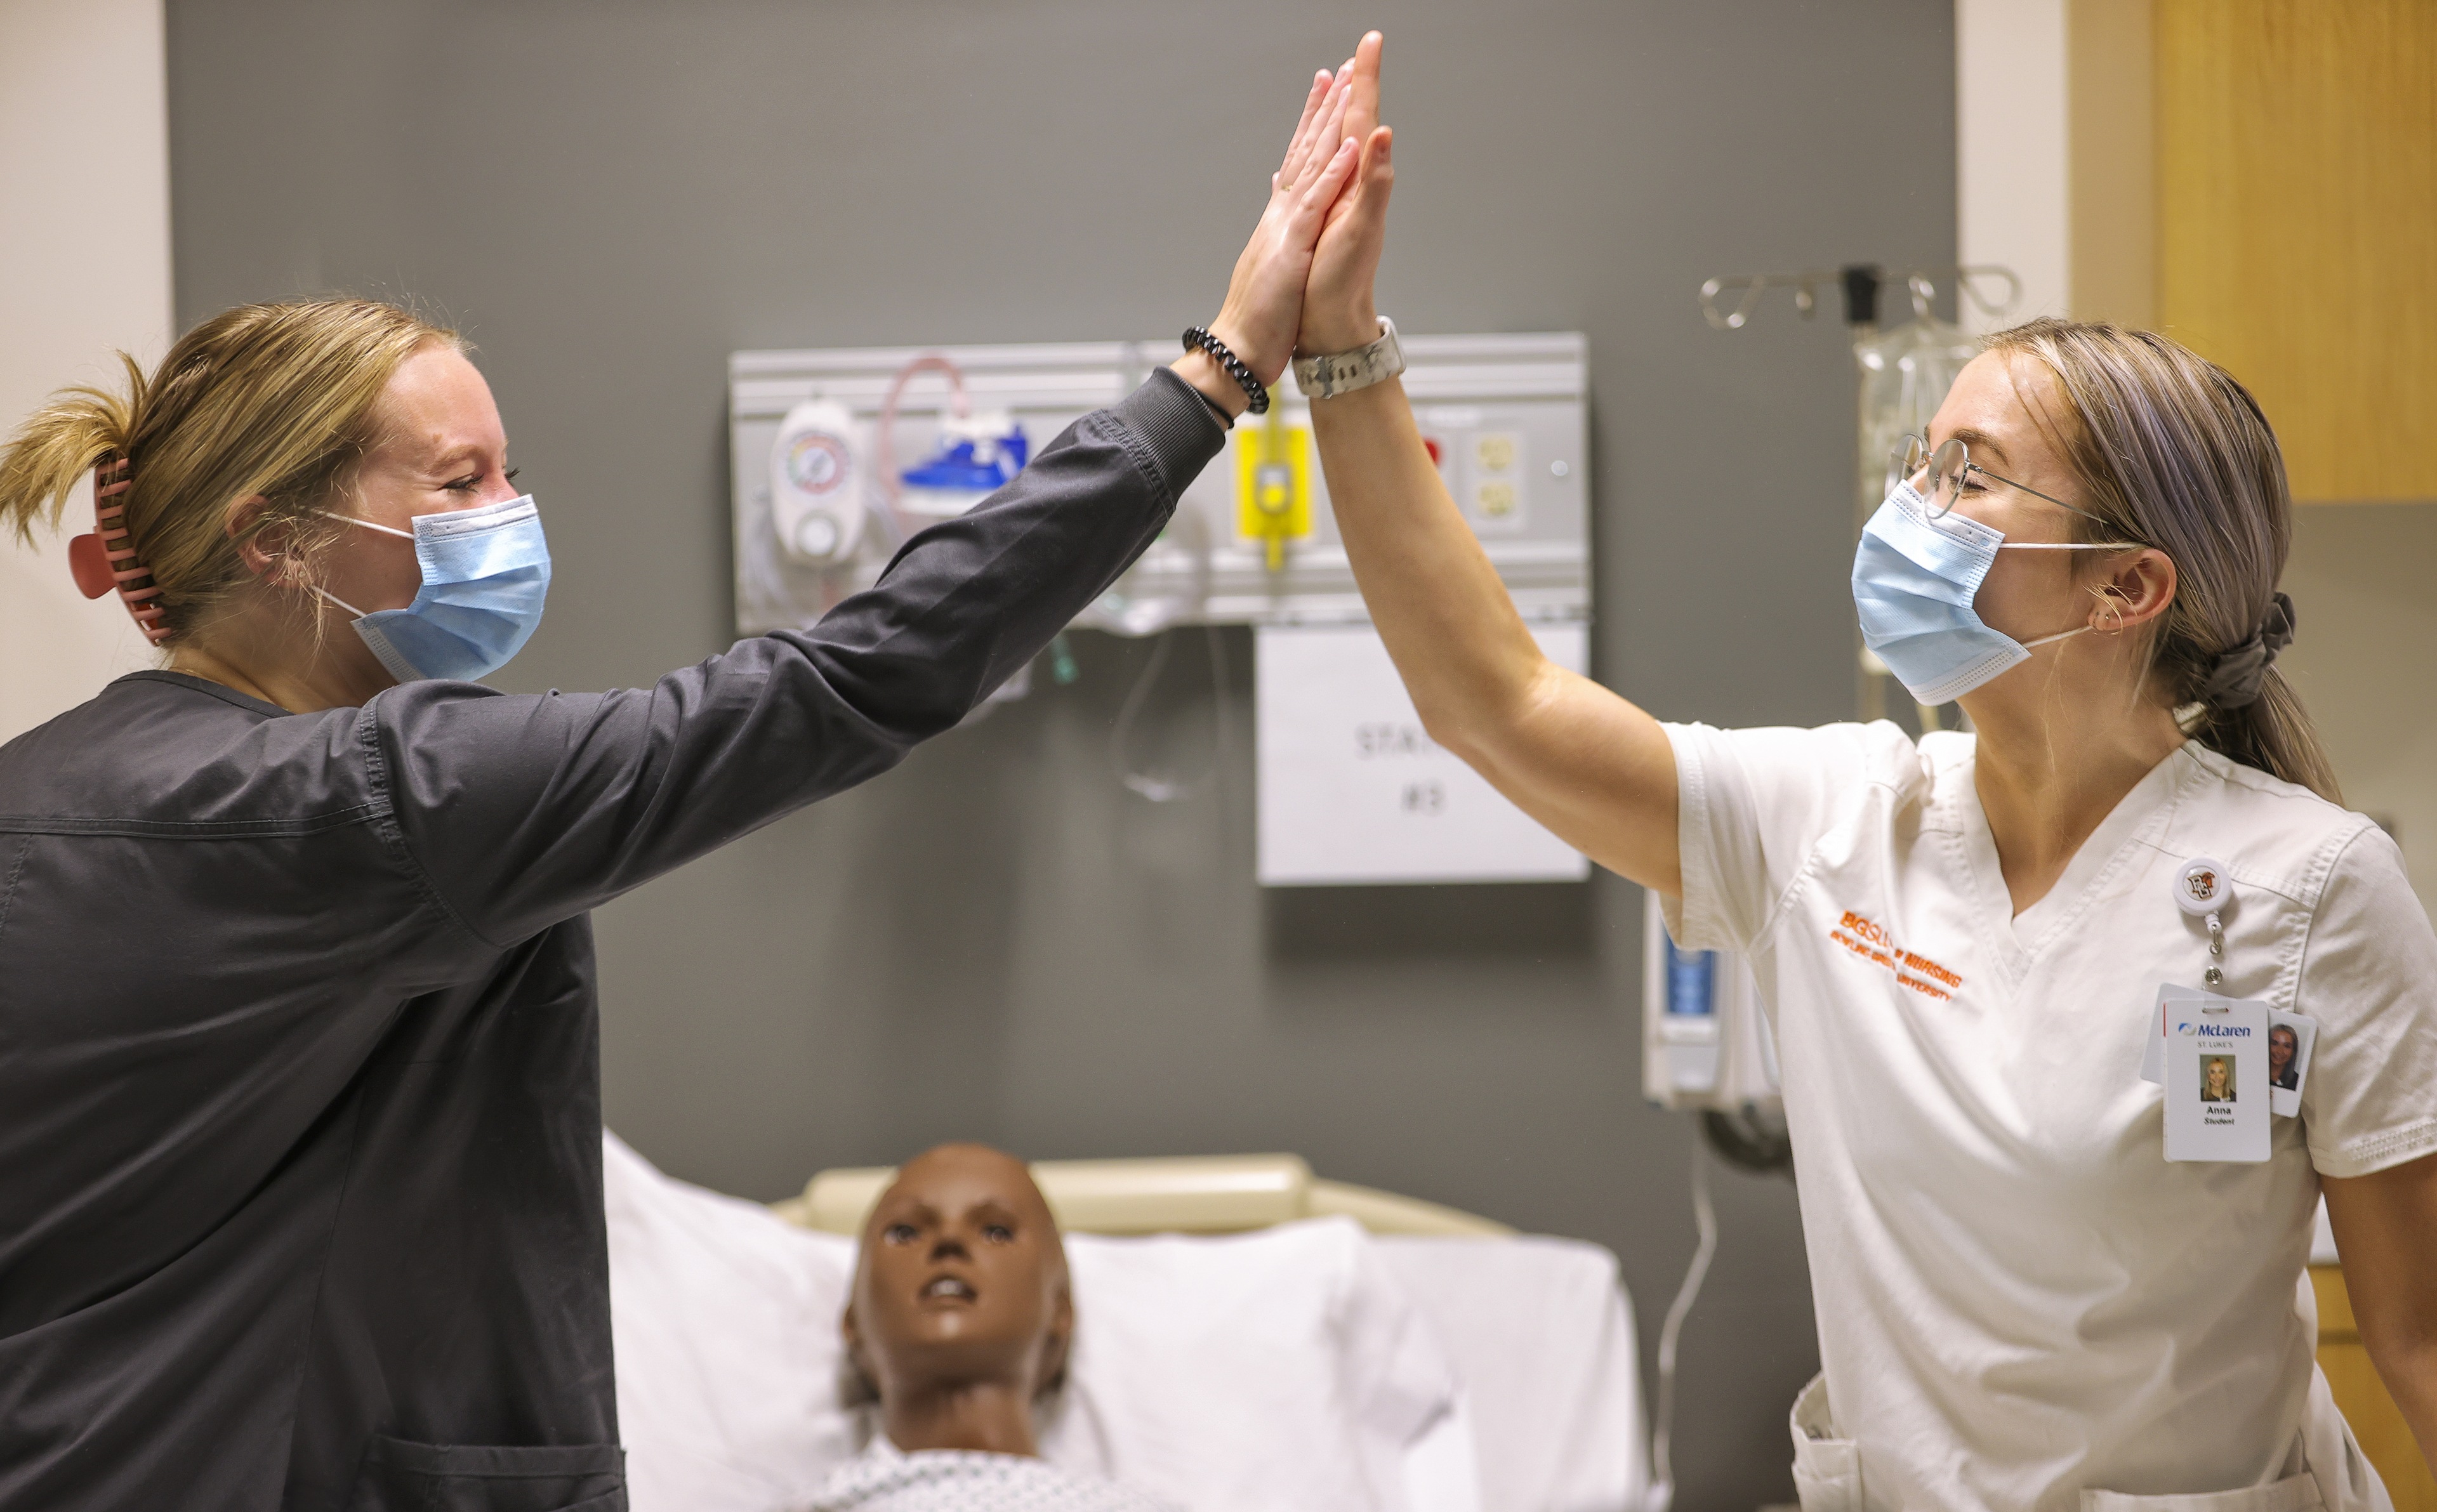 (Left-to-right) Nichole Seal, a junior from Kent, Ohio, and Anna Winger, a junior from Tiffin, Ohio, give each other a high five after successfully performing several procedures in the skills lab.